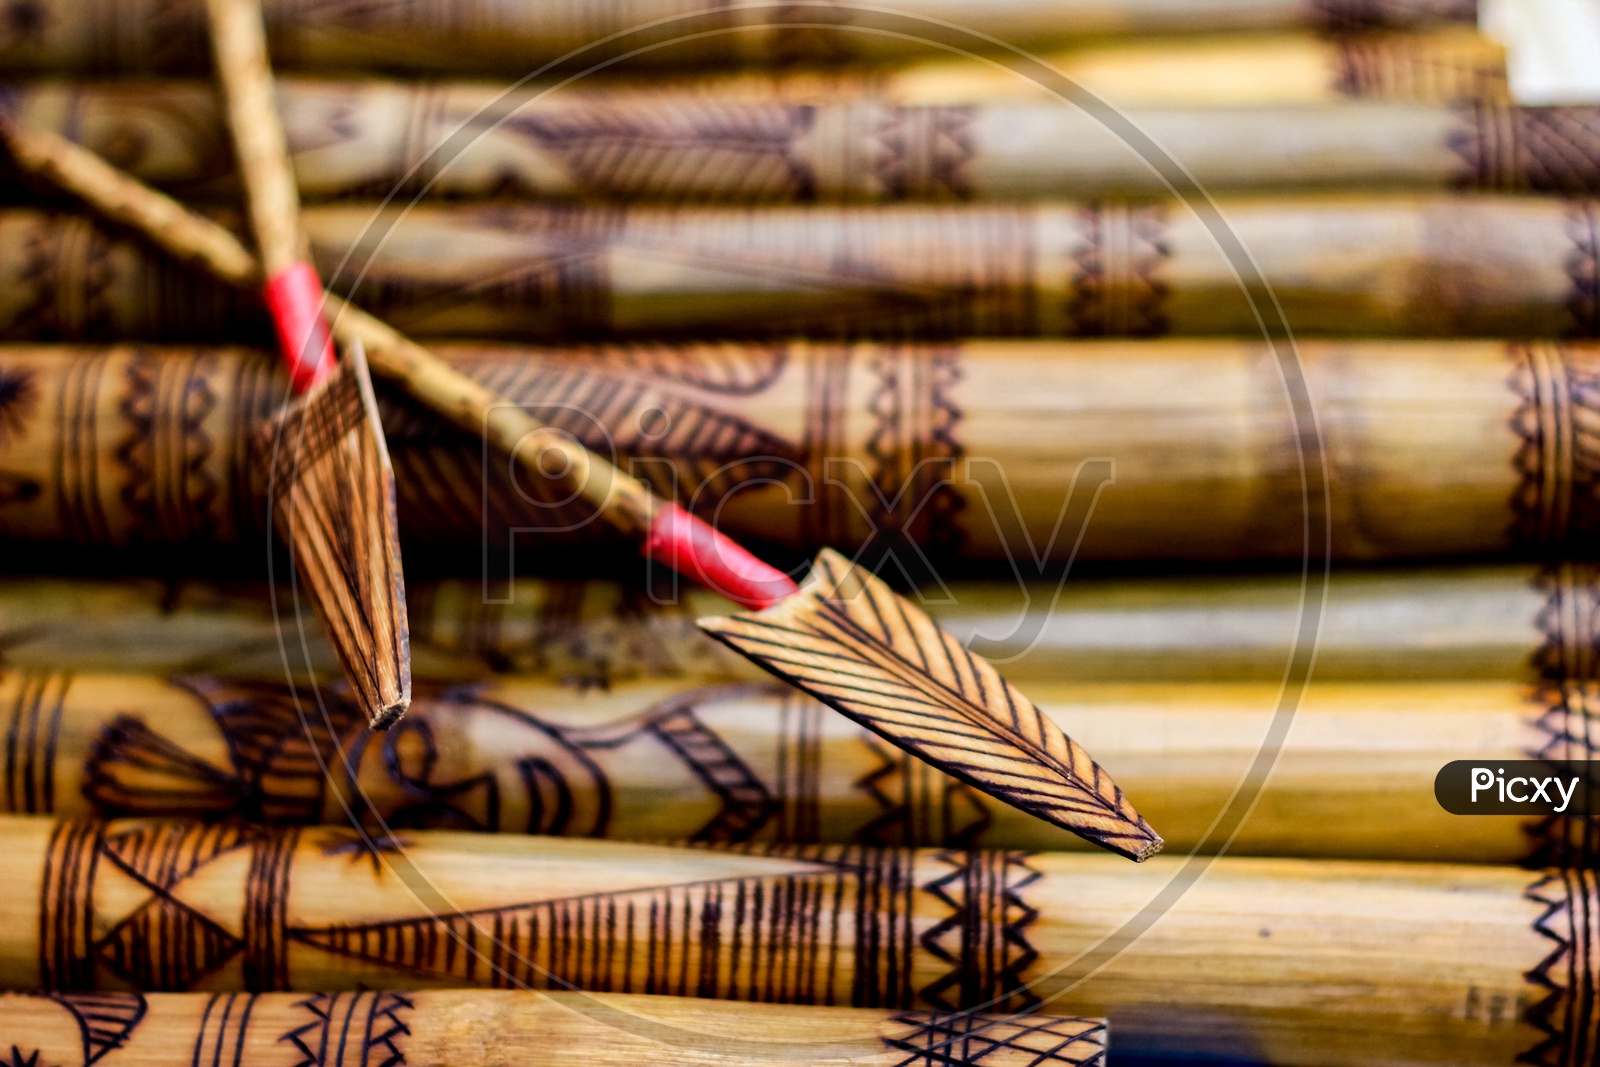 Arrow Showing Hand Made Wooden Bamboo Carving Engraved Fish Figure Artwork On Bamboo, Rows Of Engraved Bamboo Sticks. Tribal Artwork. Textured Background